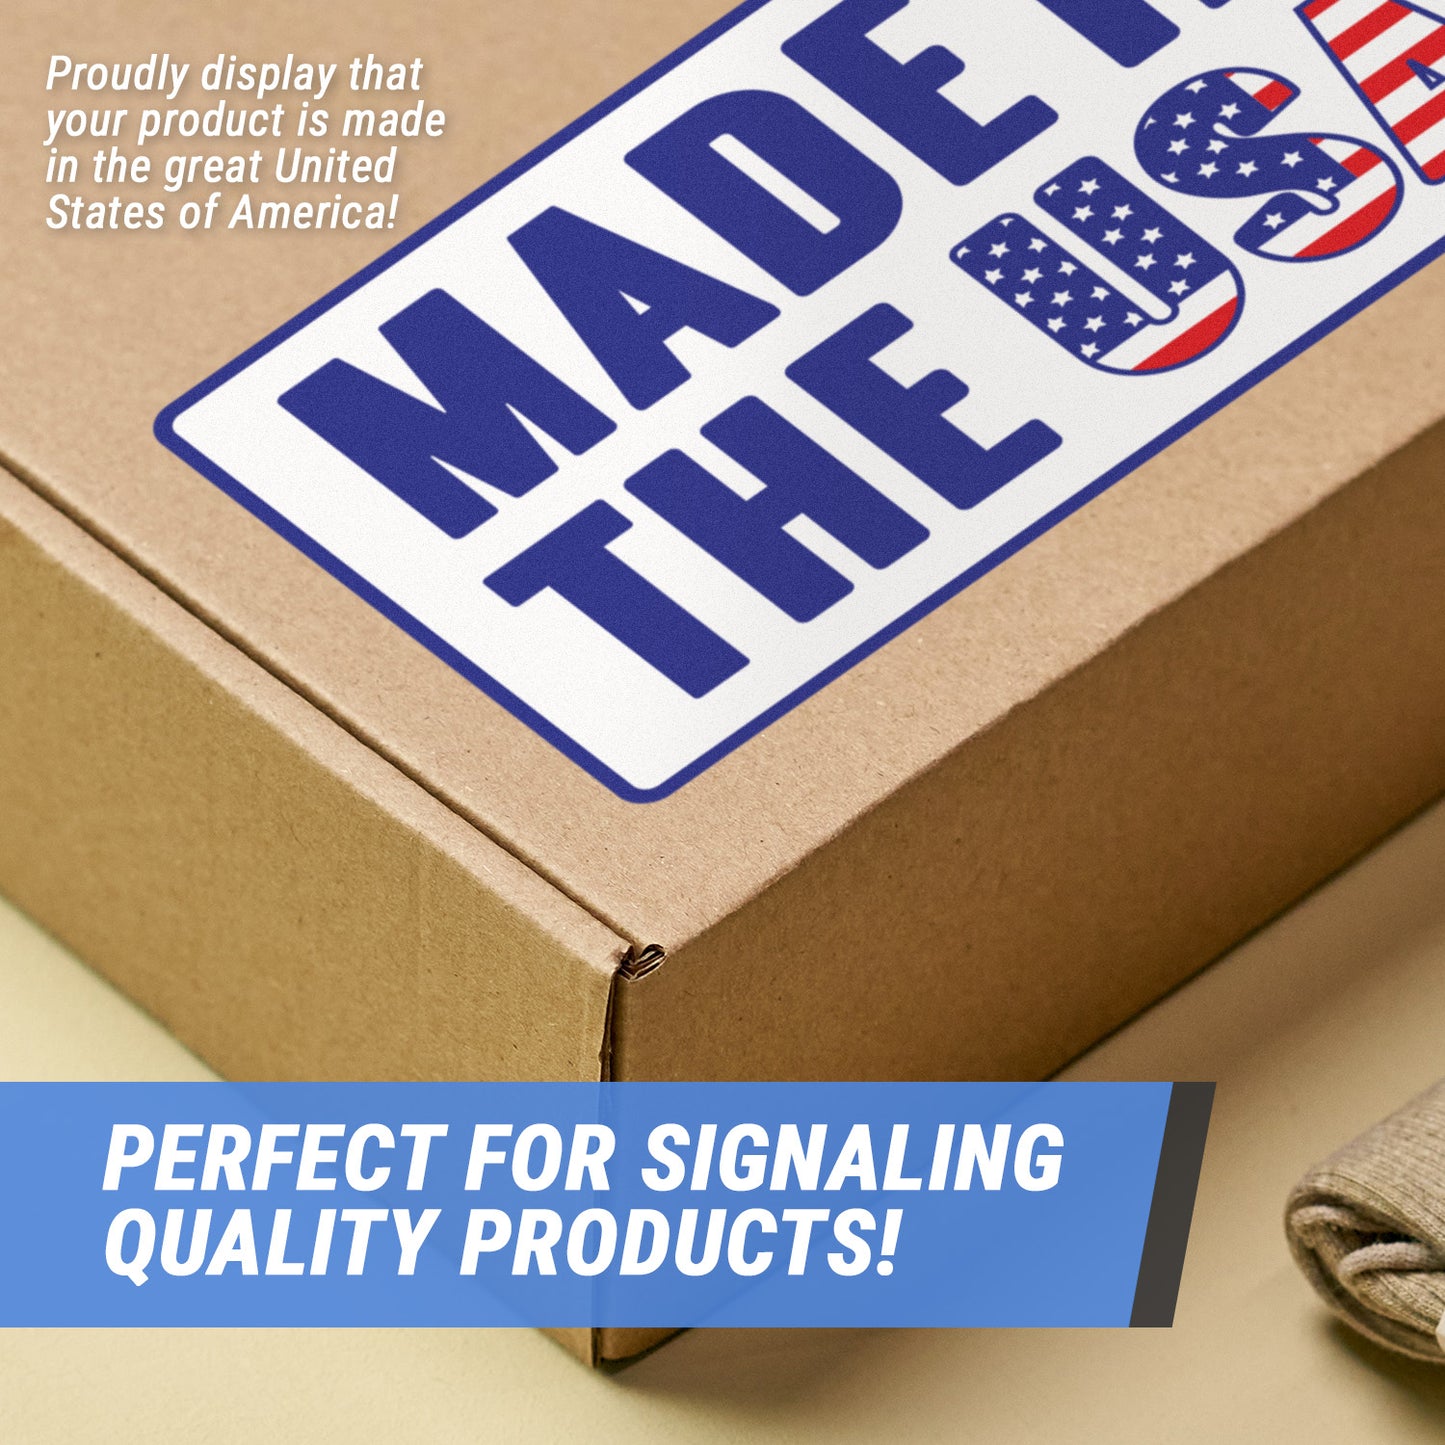 5 x 3 inch | Retail & Sales: Made in the USA Stickers